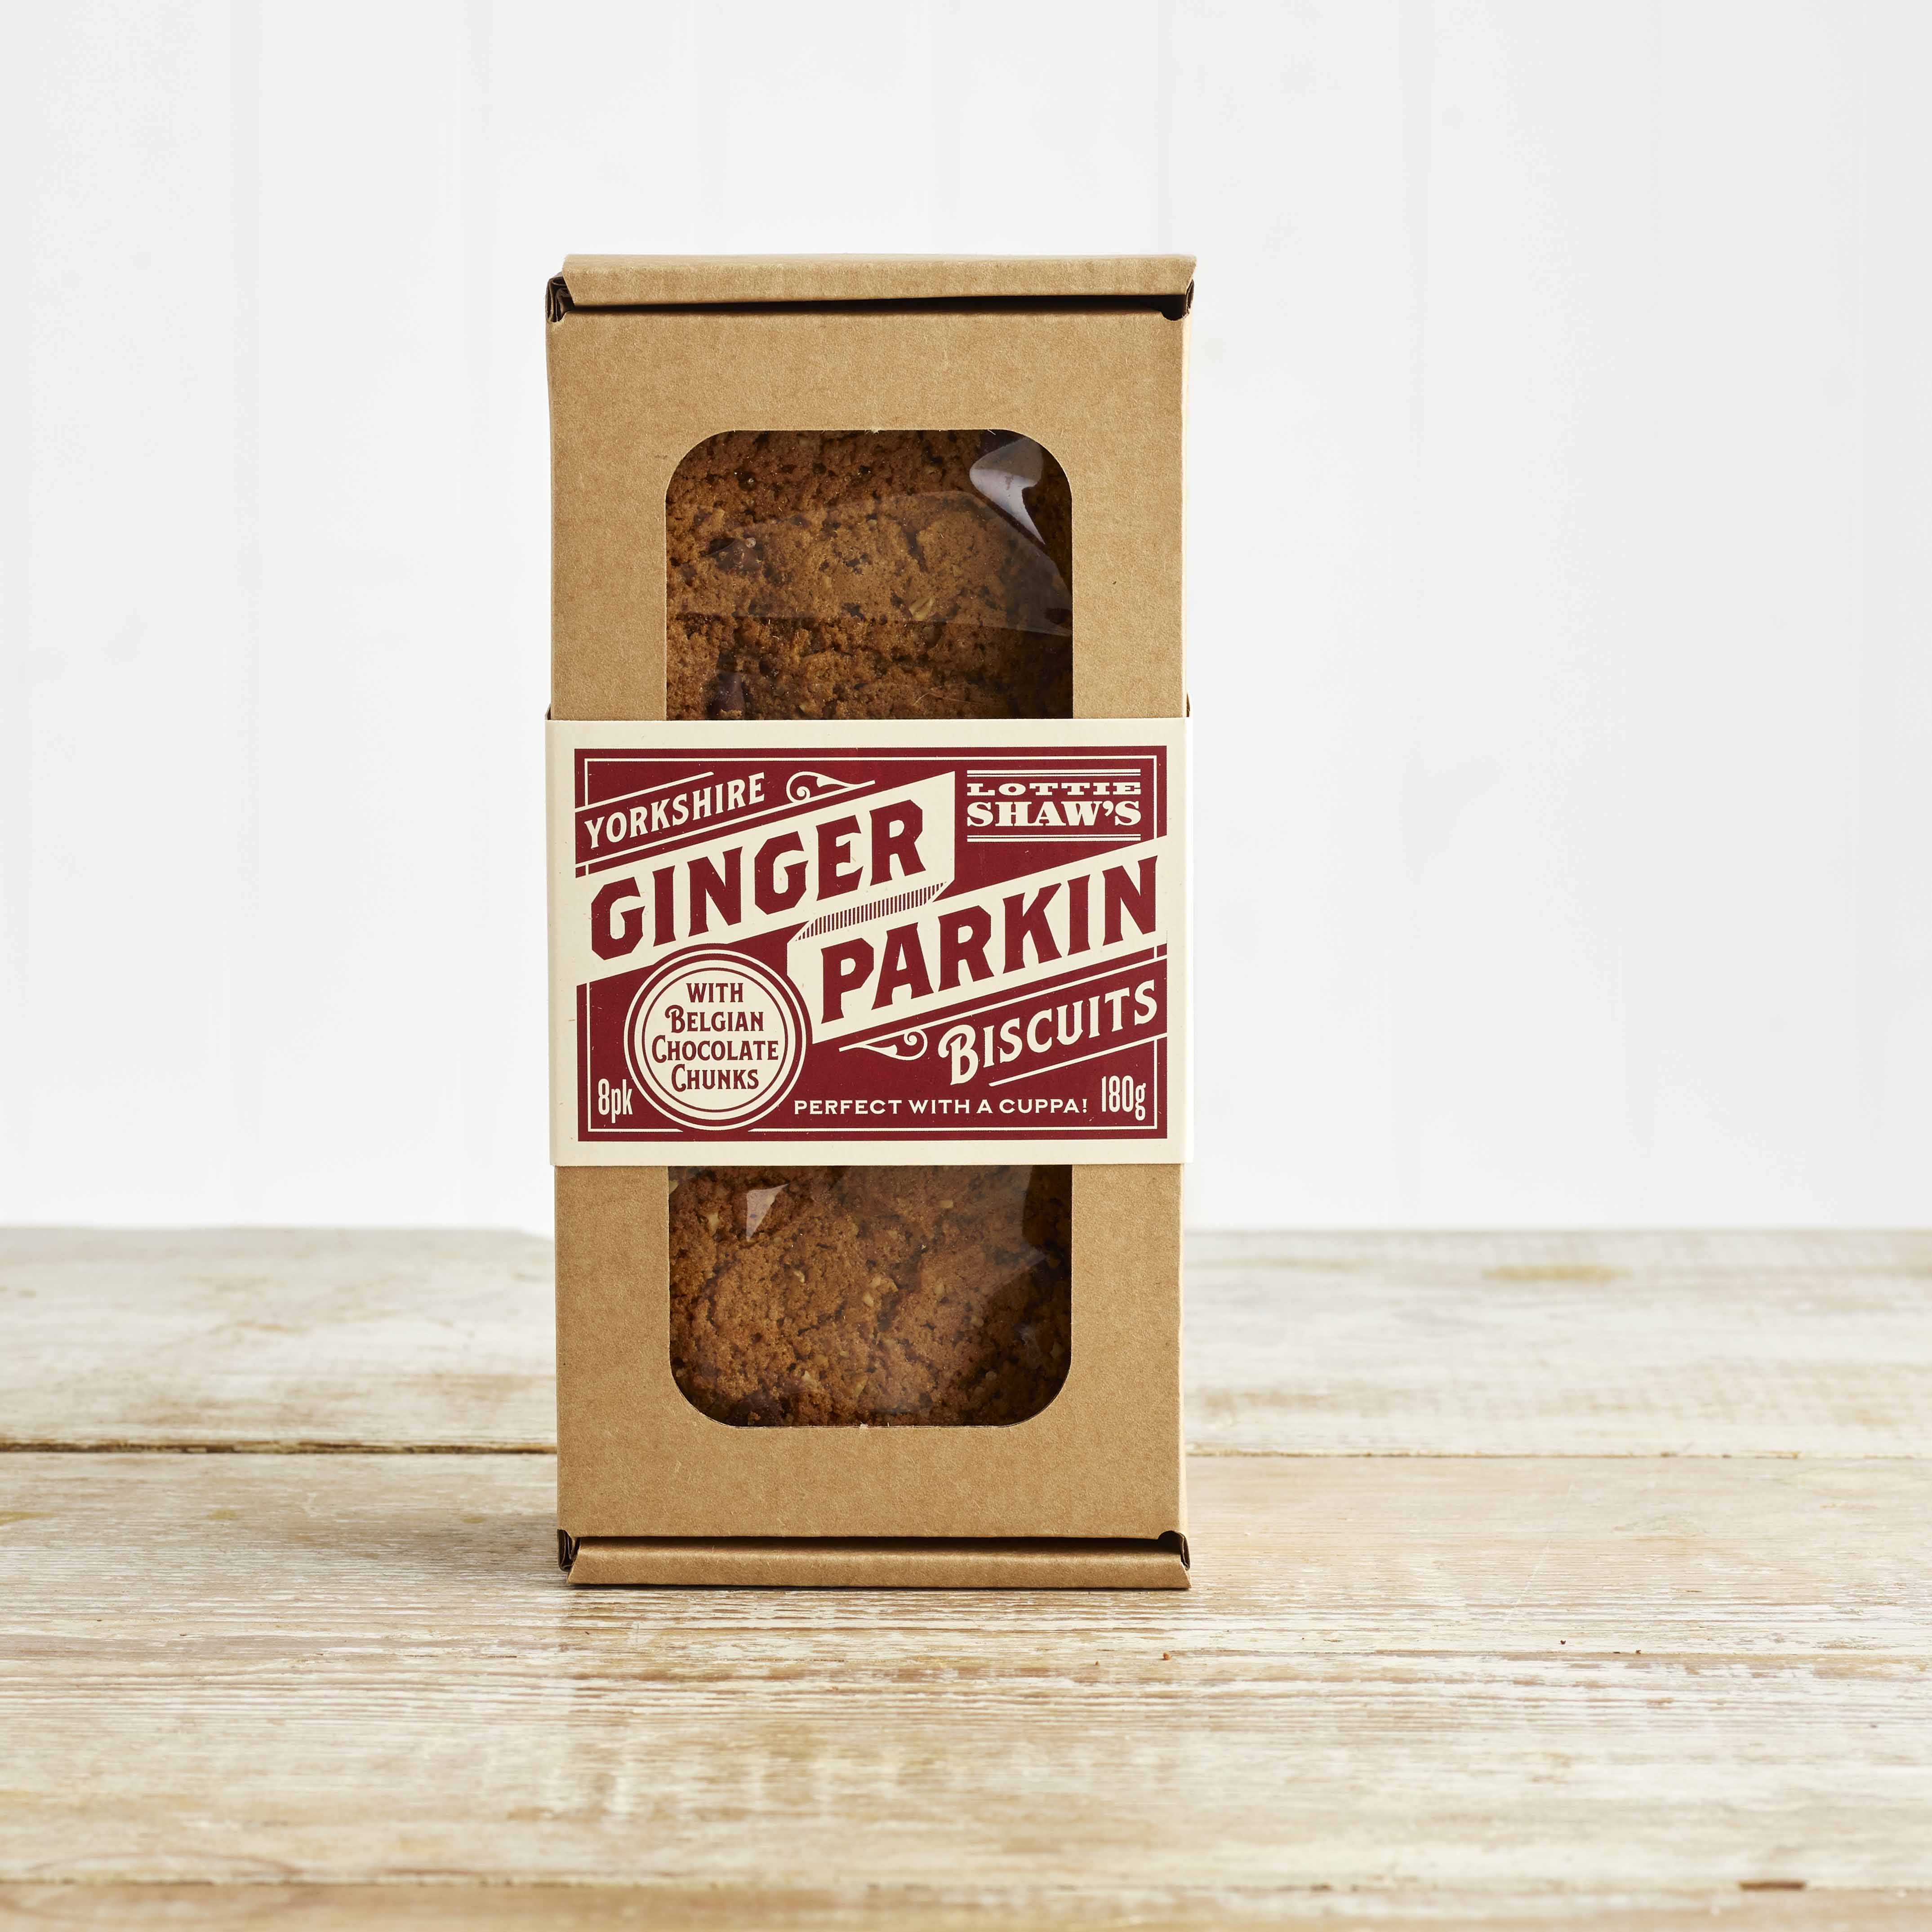 Lottie Shaw’s Ginger Parkin Biscuits with Belgian Chocolate Chunks, 180g